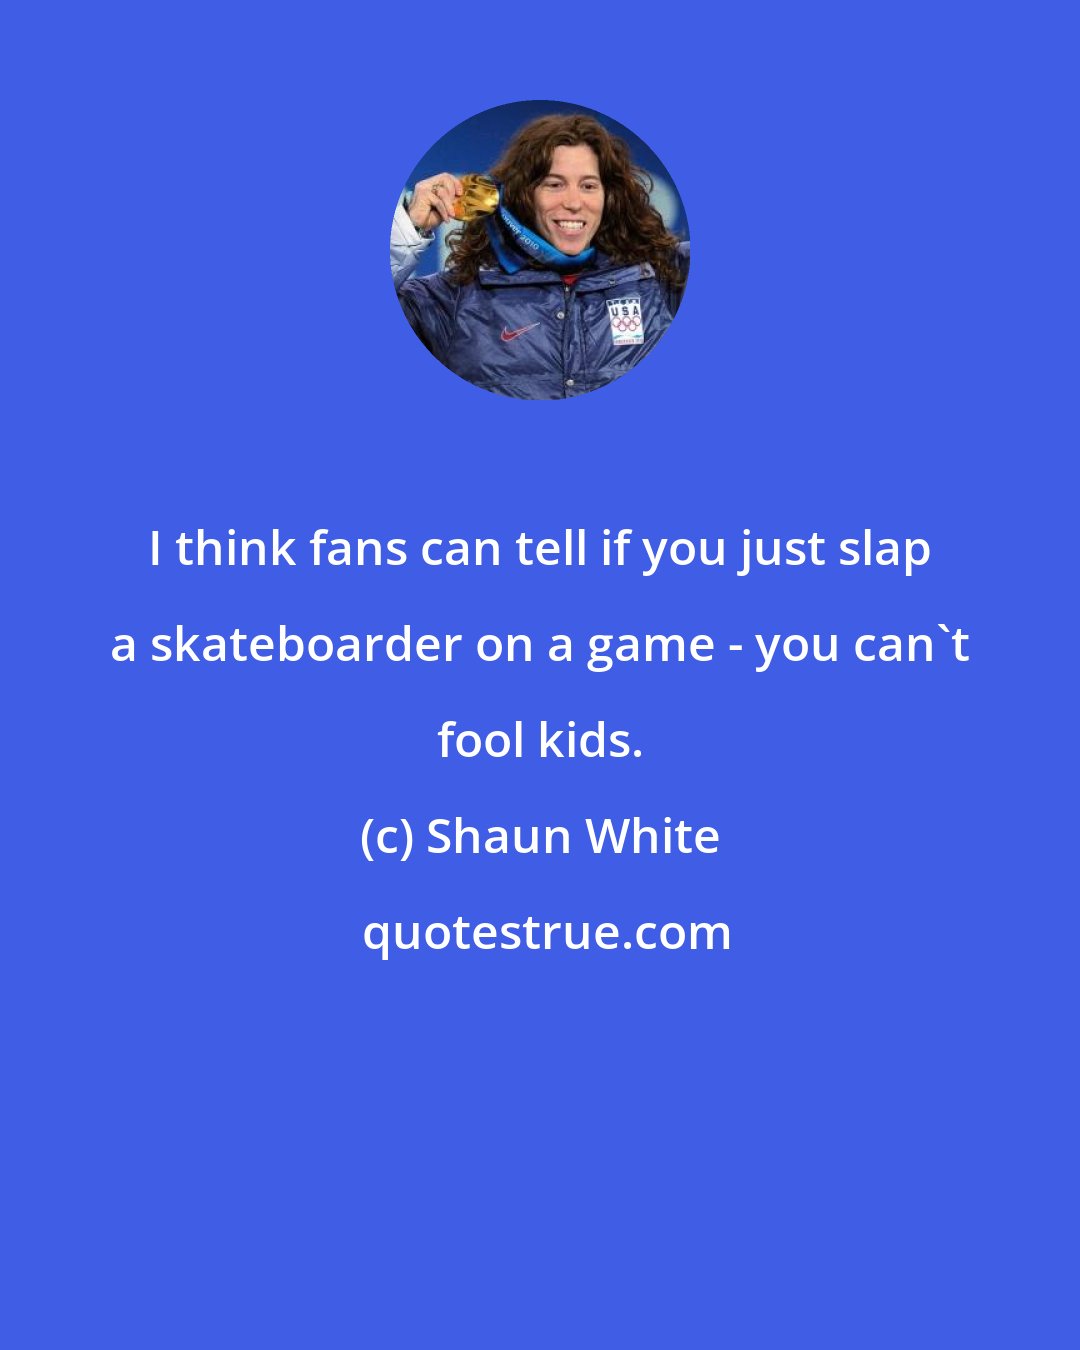 Shaun White: I think fans can tell if you just slap a skateboarder on a game - you can't fool kids.